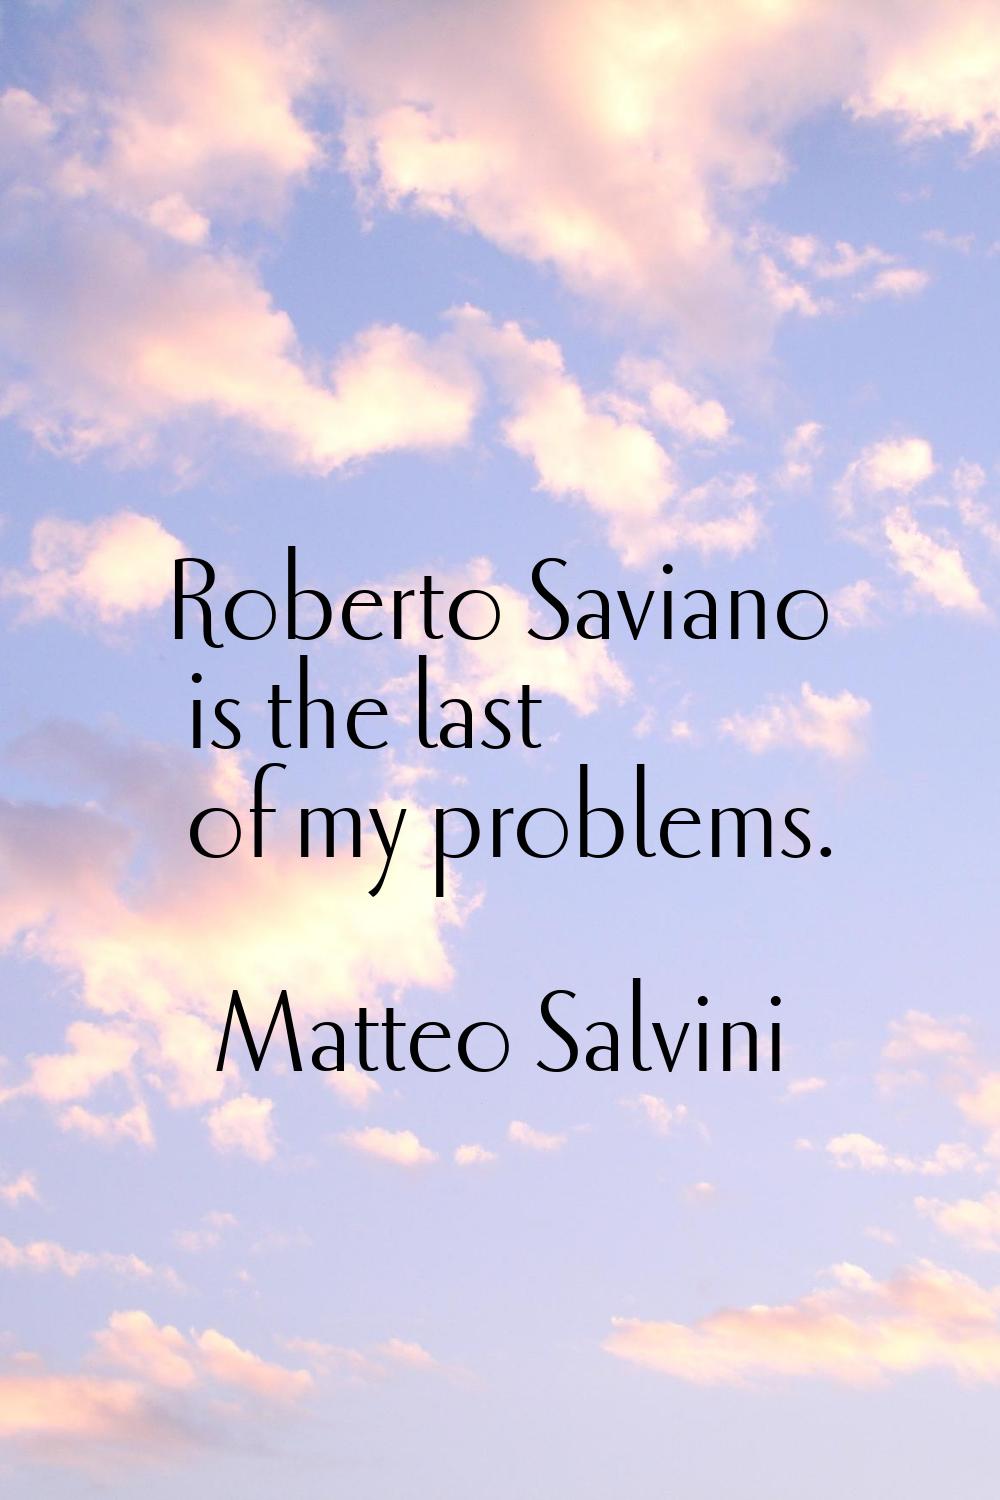 Roberto Saviano is the last of my problems.